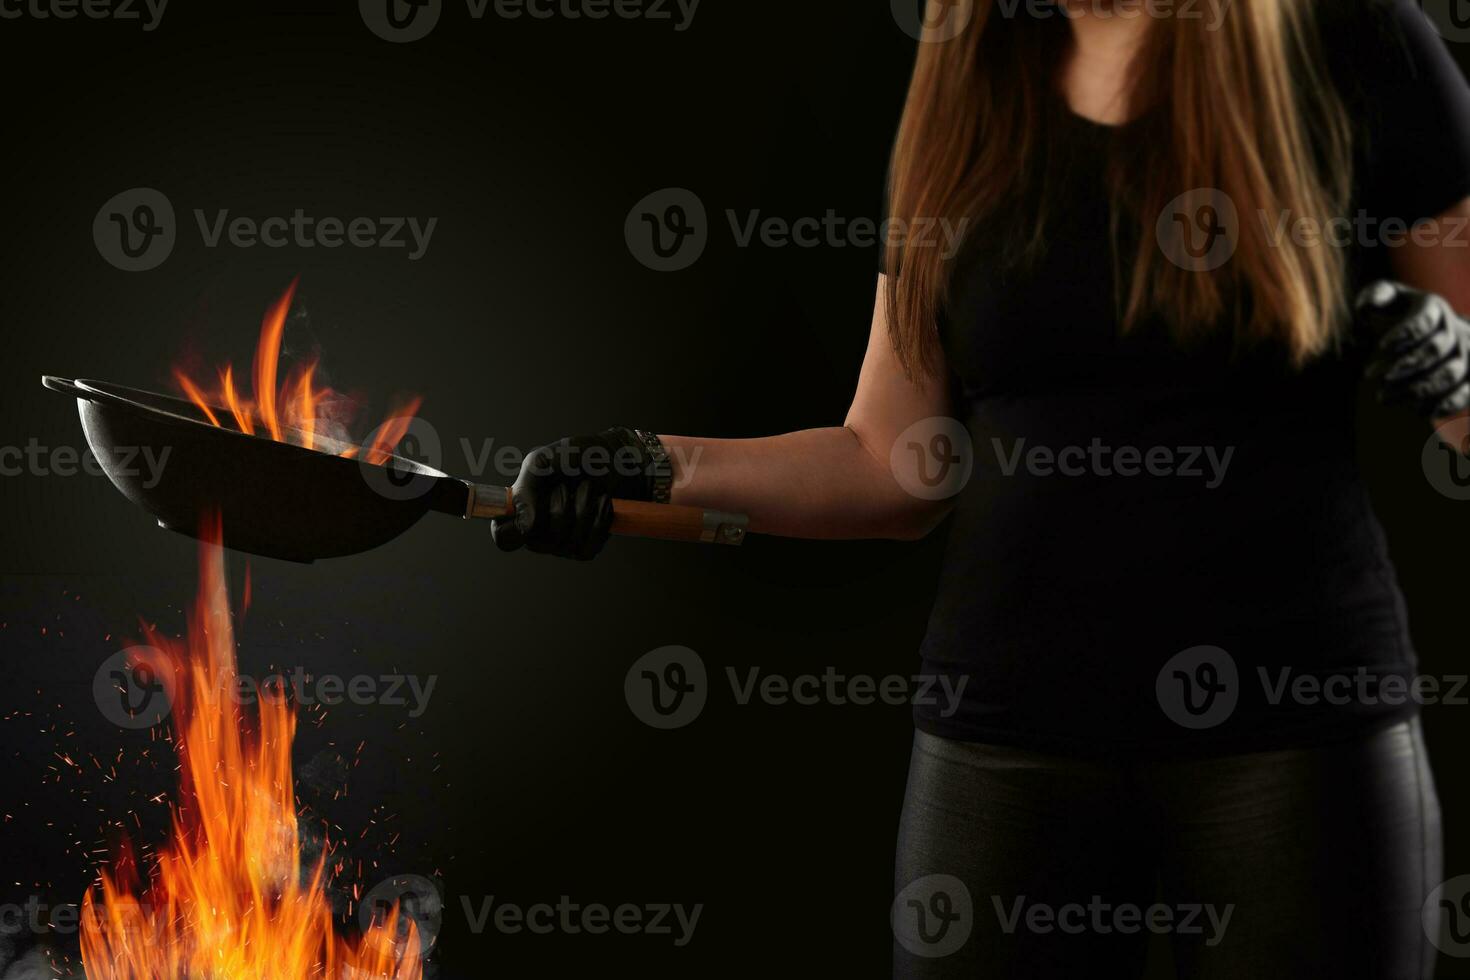 Brunette lady with tattooed hands, dressed in leggings and t-shirt. Holding a wok pan above fire against black background. Cooking concept. Side view photo